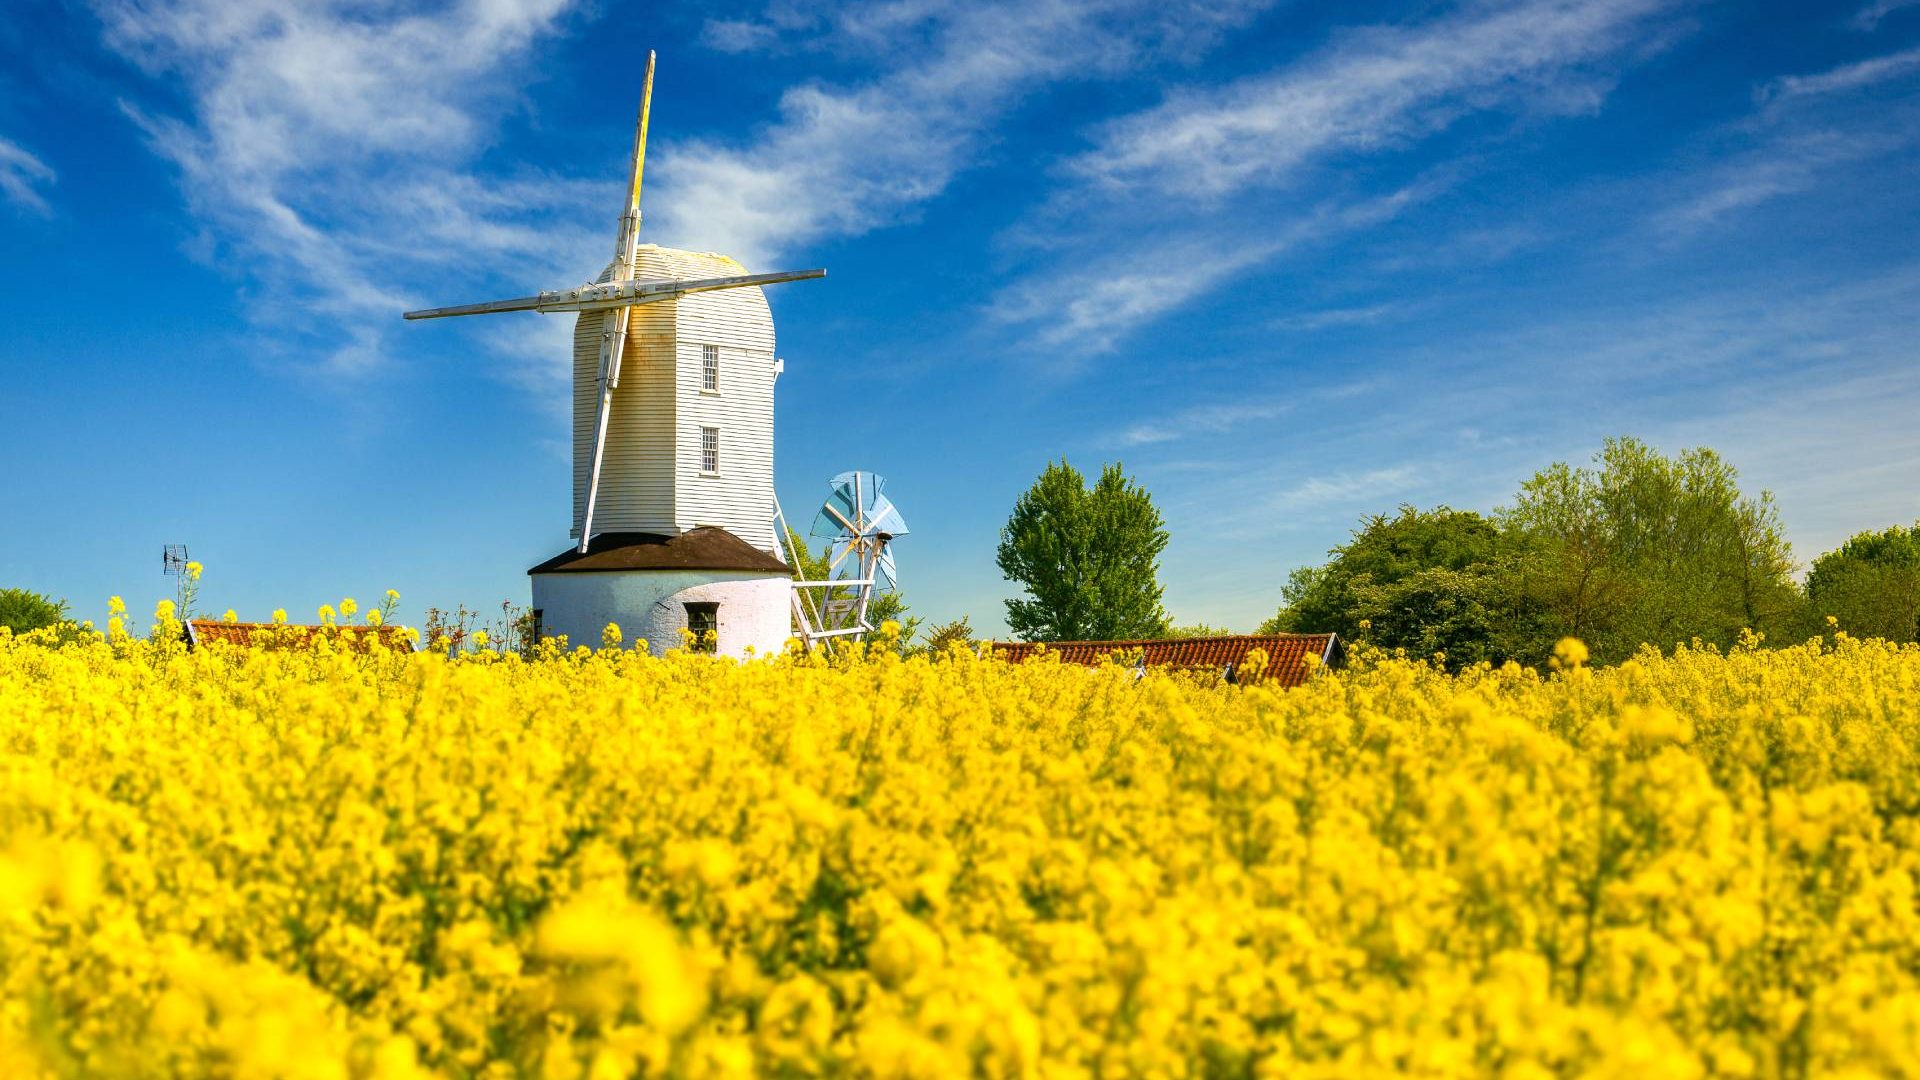 A yellow flower field with a windmill in Suffolk